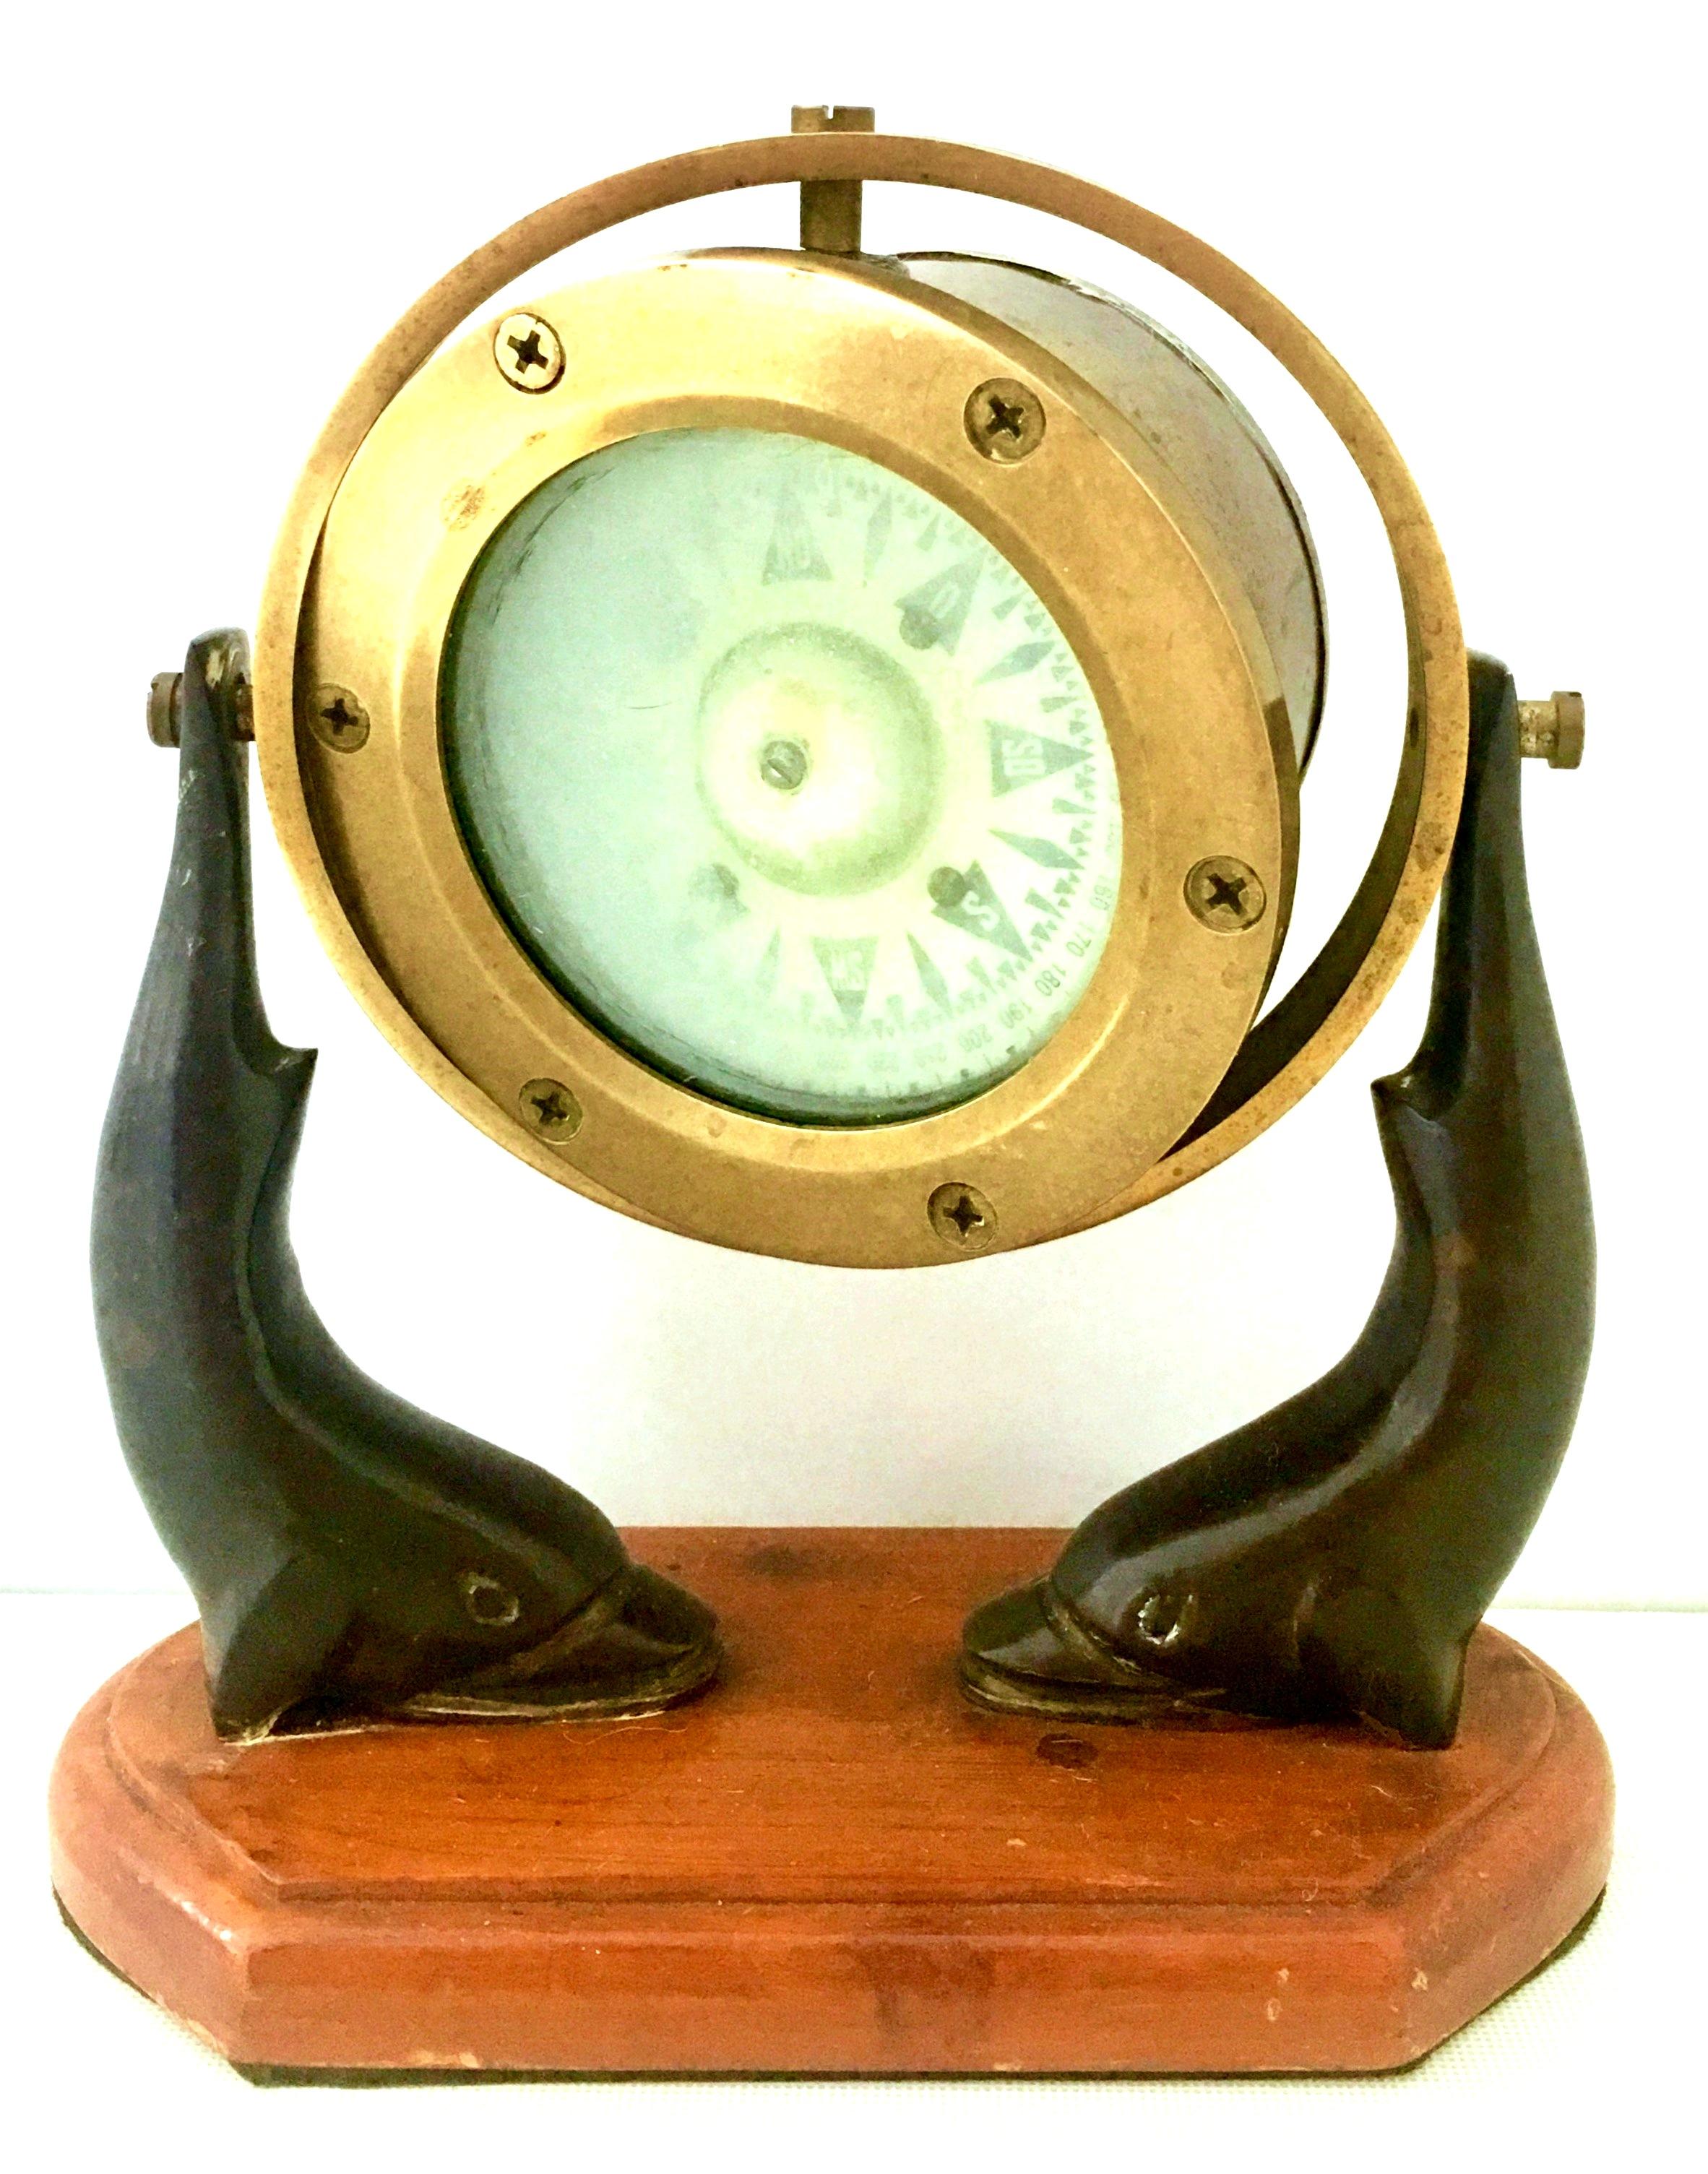 Early 20th century English working brass liquid ships compass. Mounted on a double bronze dolphin and pine wood articulating stand. 
Compass diameter, 4